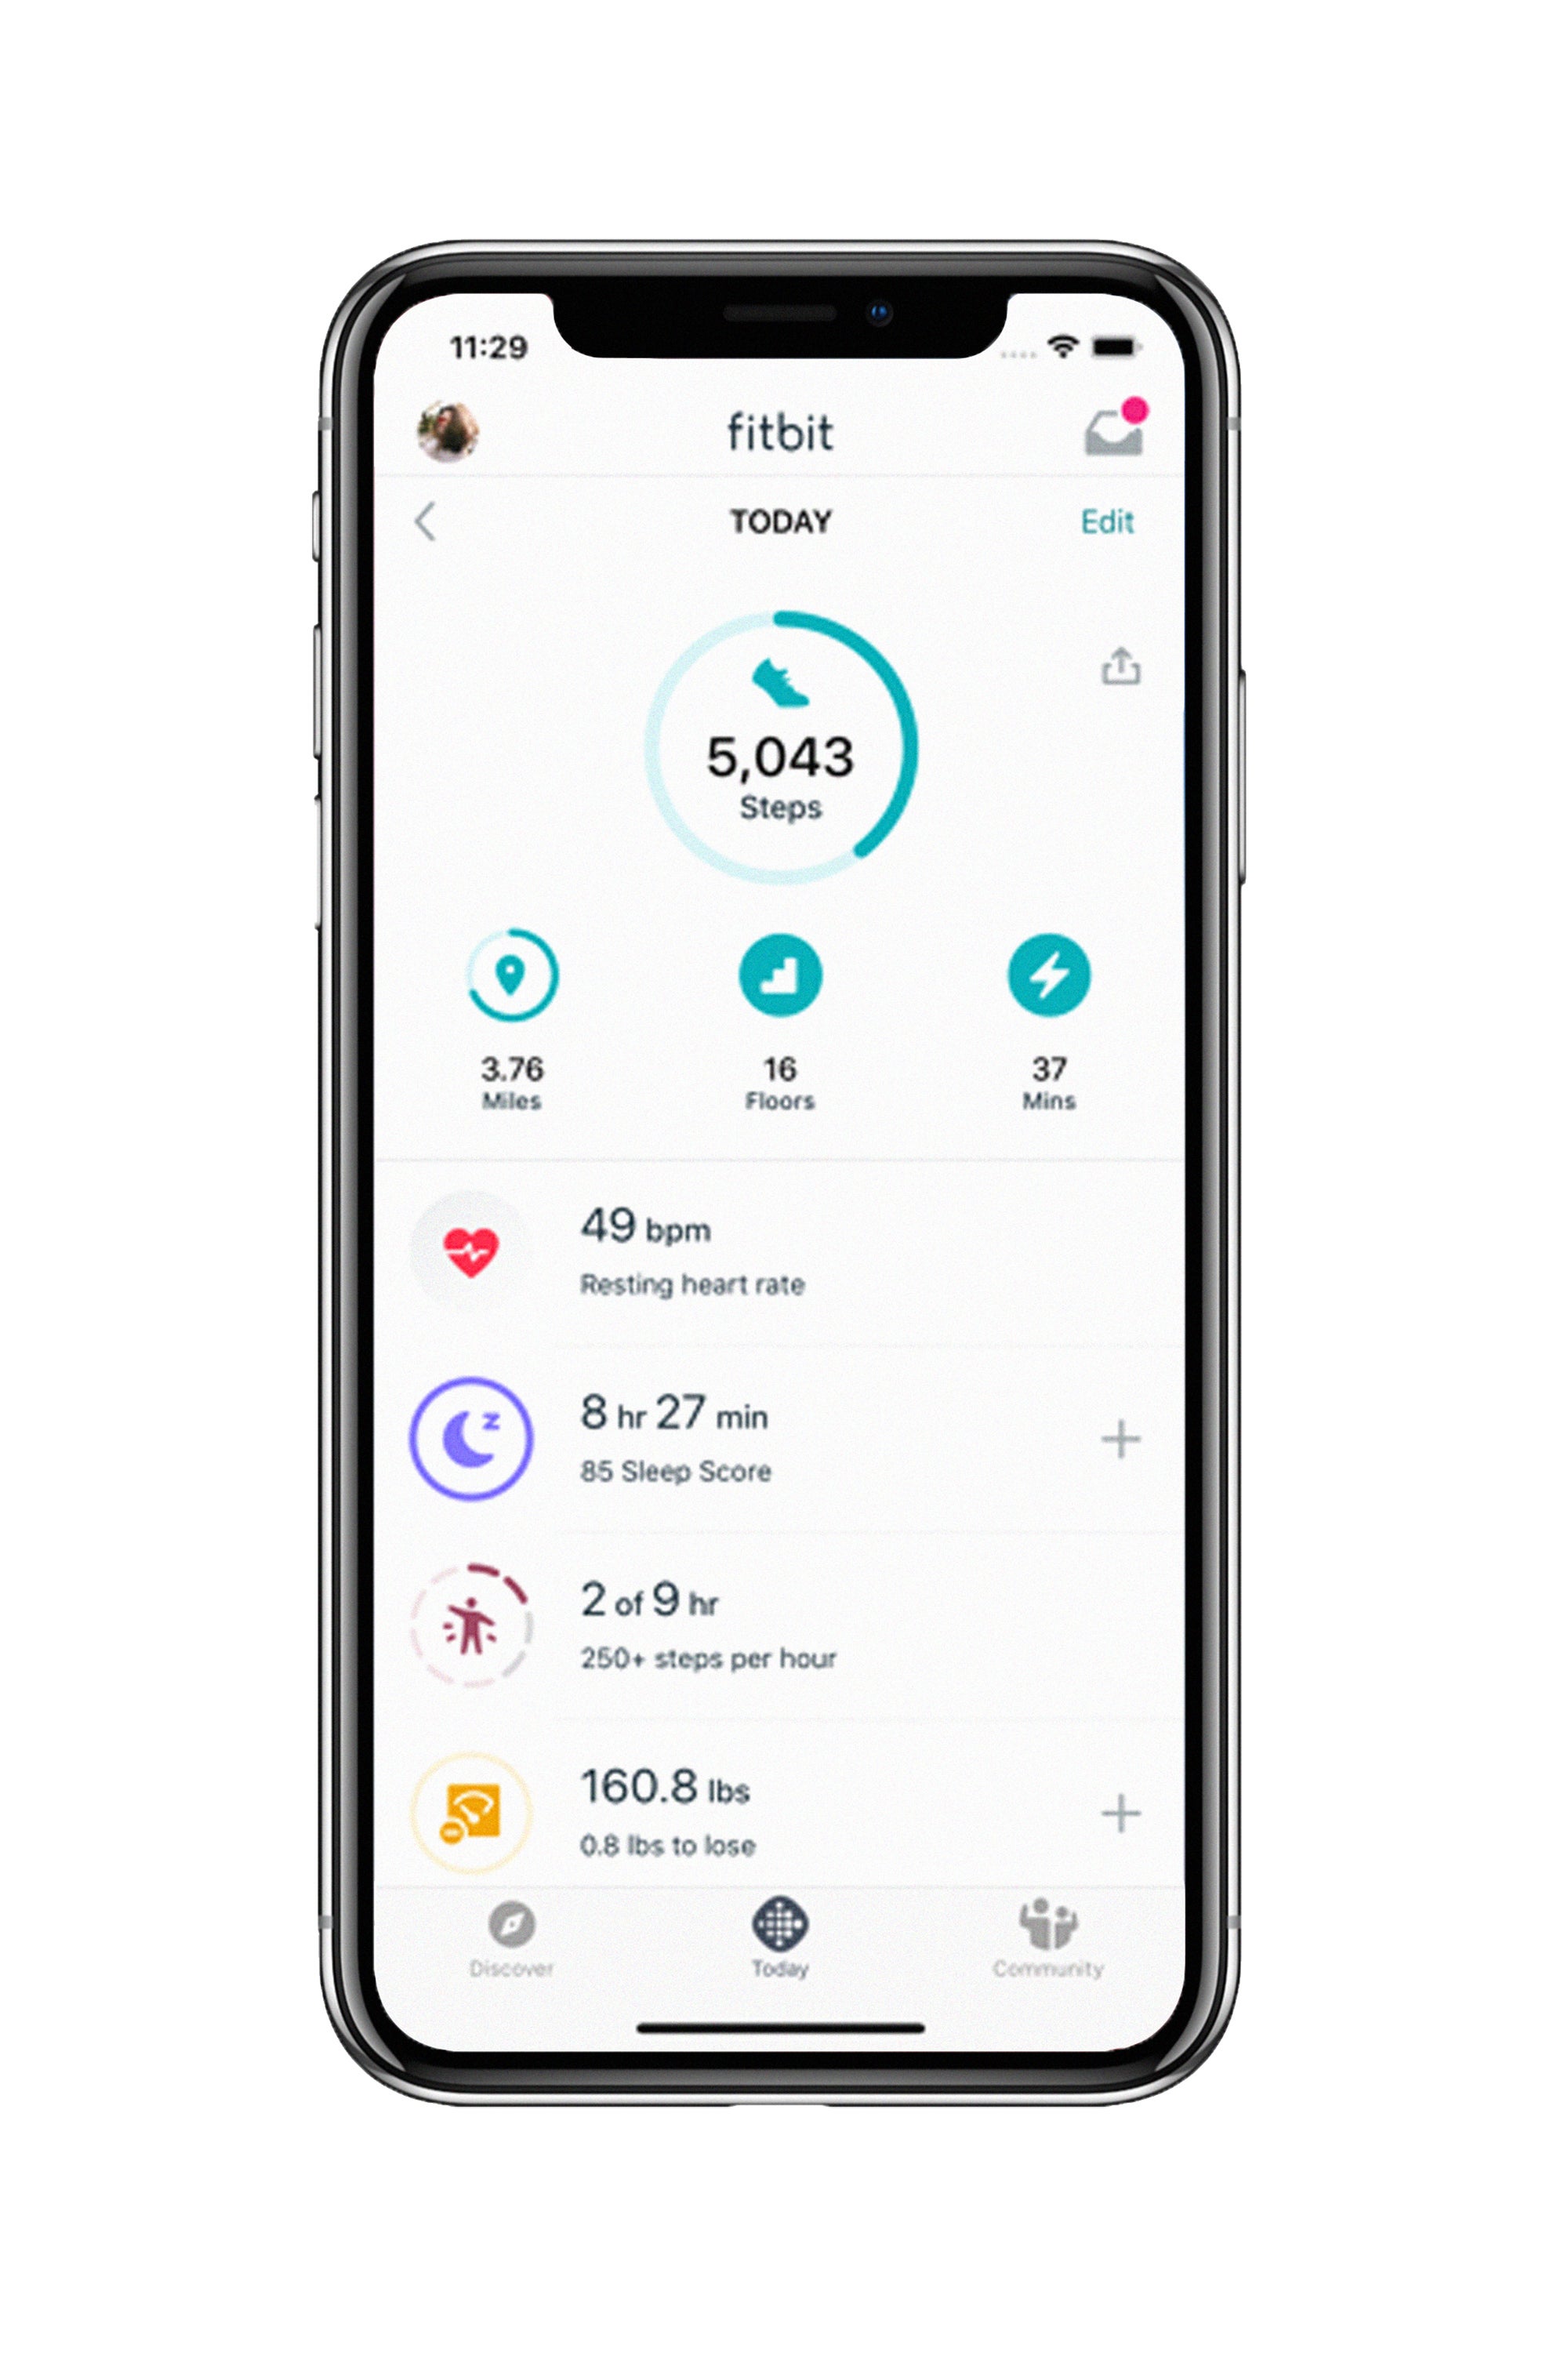 fitbit step counter app